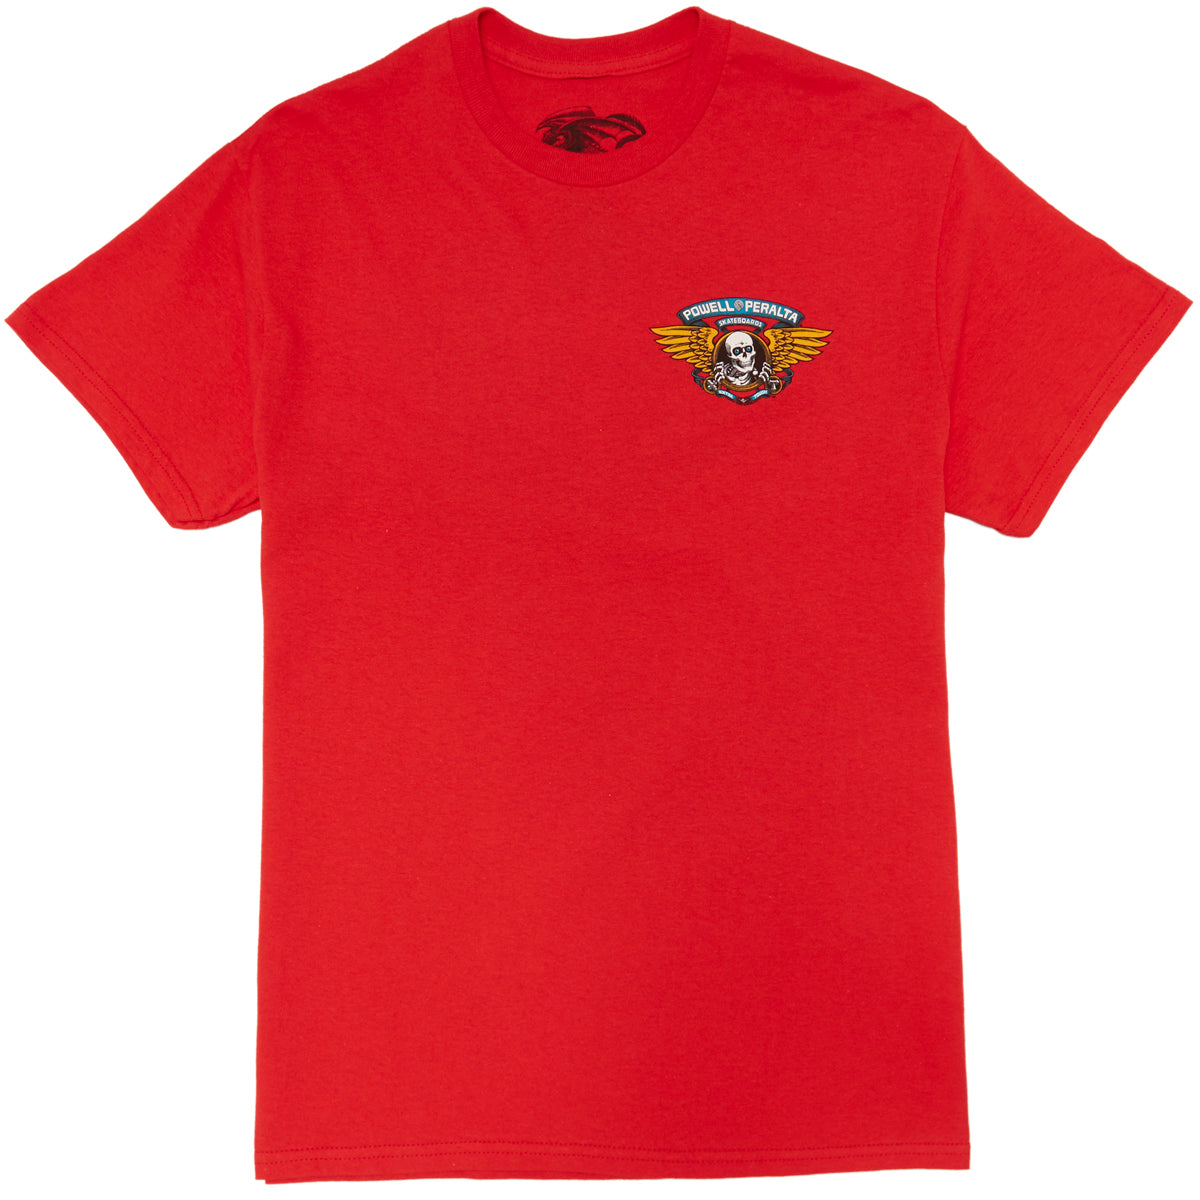 Powell-Peralta Winged Ripper T-Shirt - Red image 2